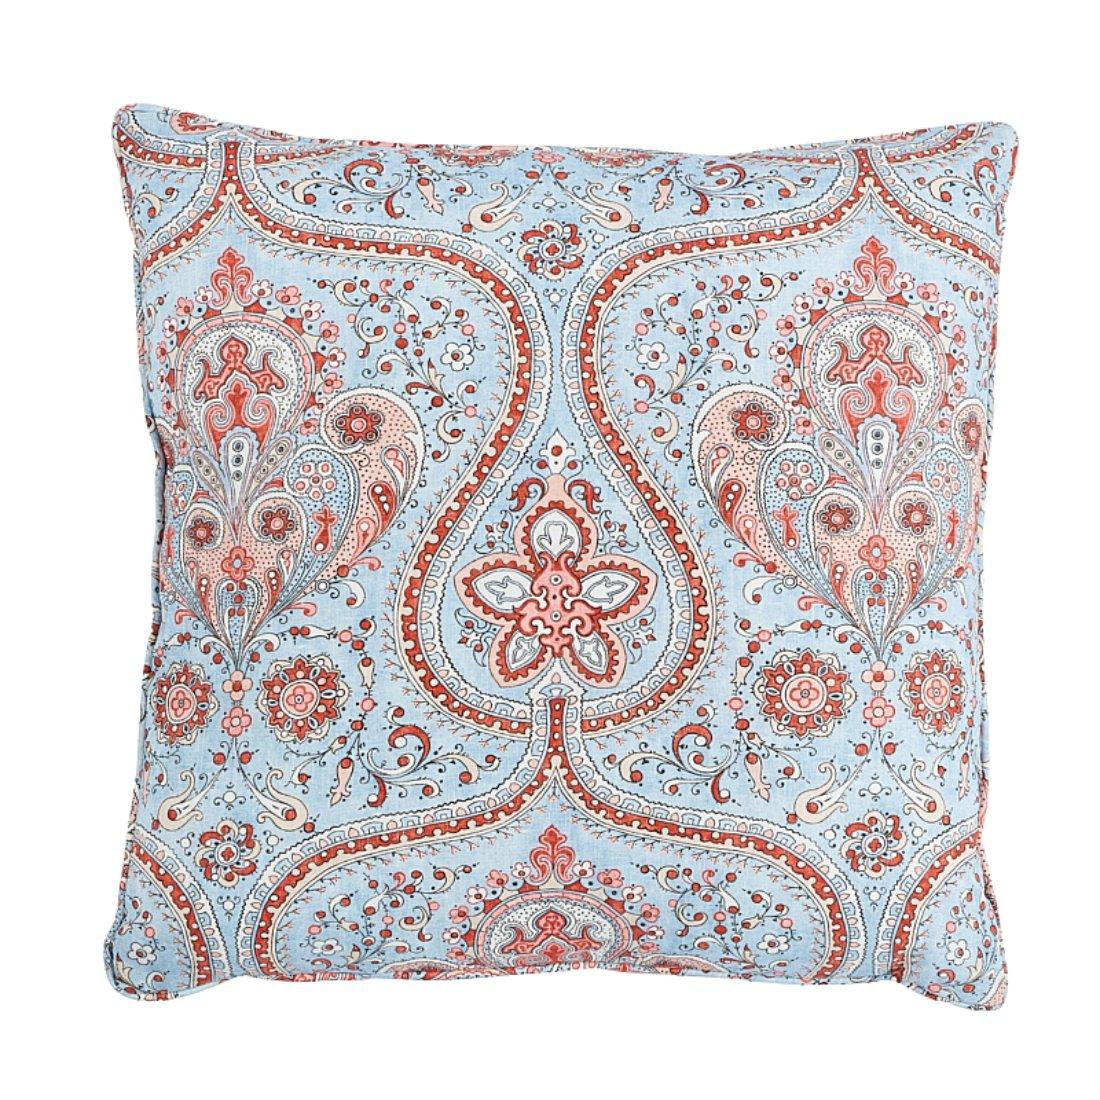 This pillow features Paisley Court with a Self Welt finish. With its alternating, irregular stripes and chevrons, this exceptional woven linen has a tribal look and the sophistication of a rare, antique textile. Pillow includes a feather/down fill